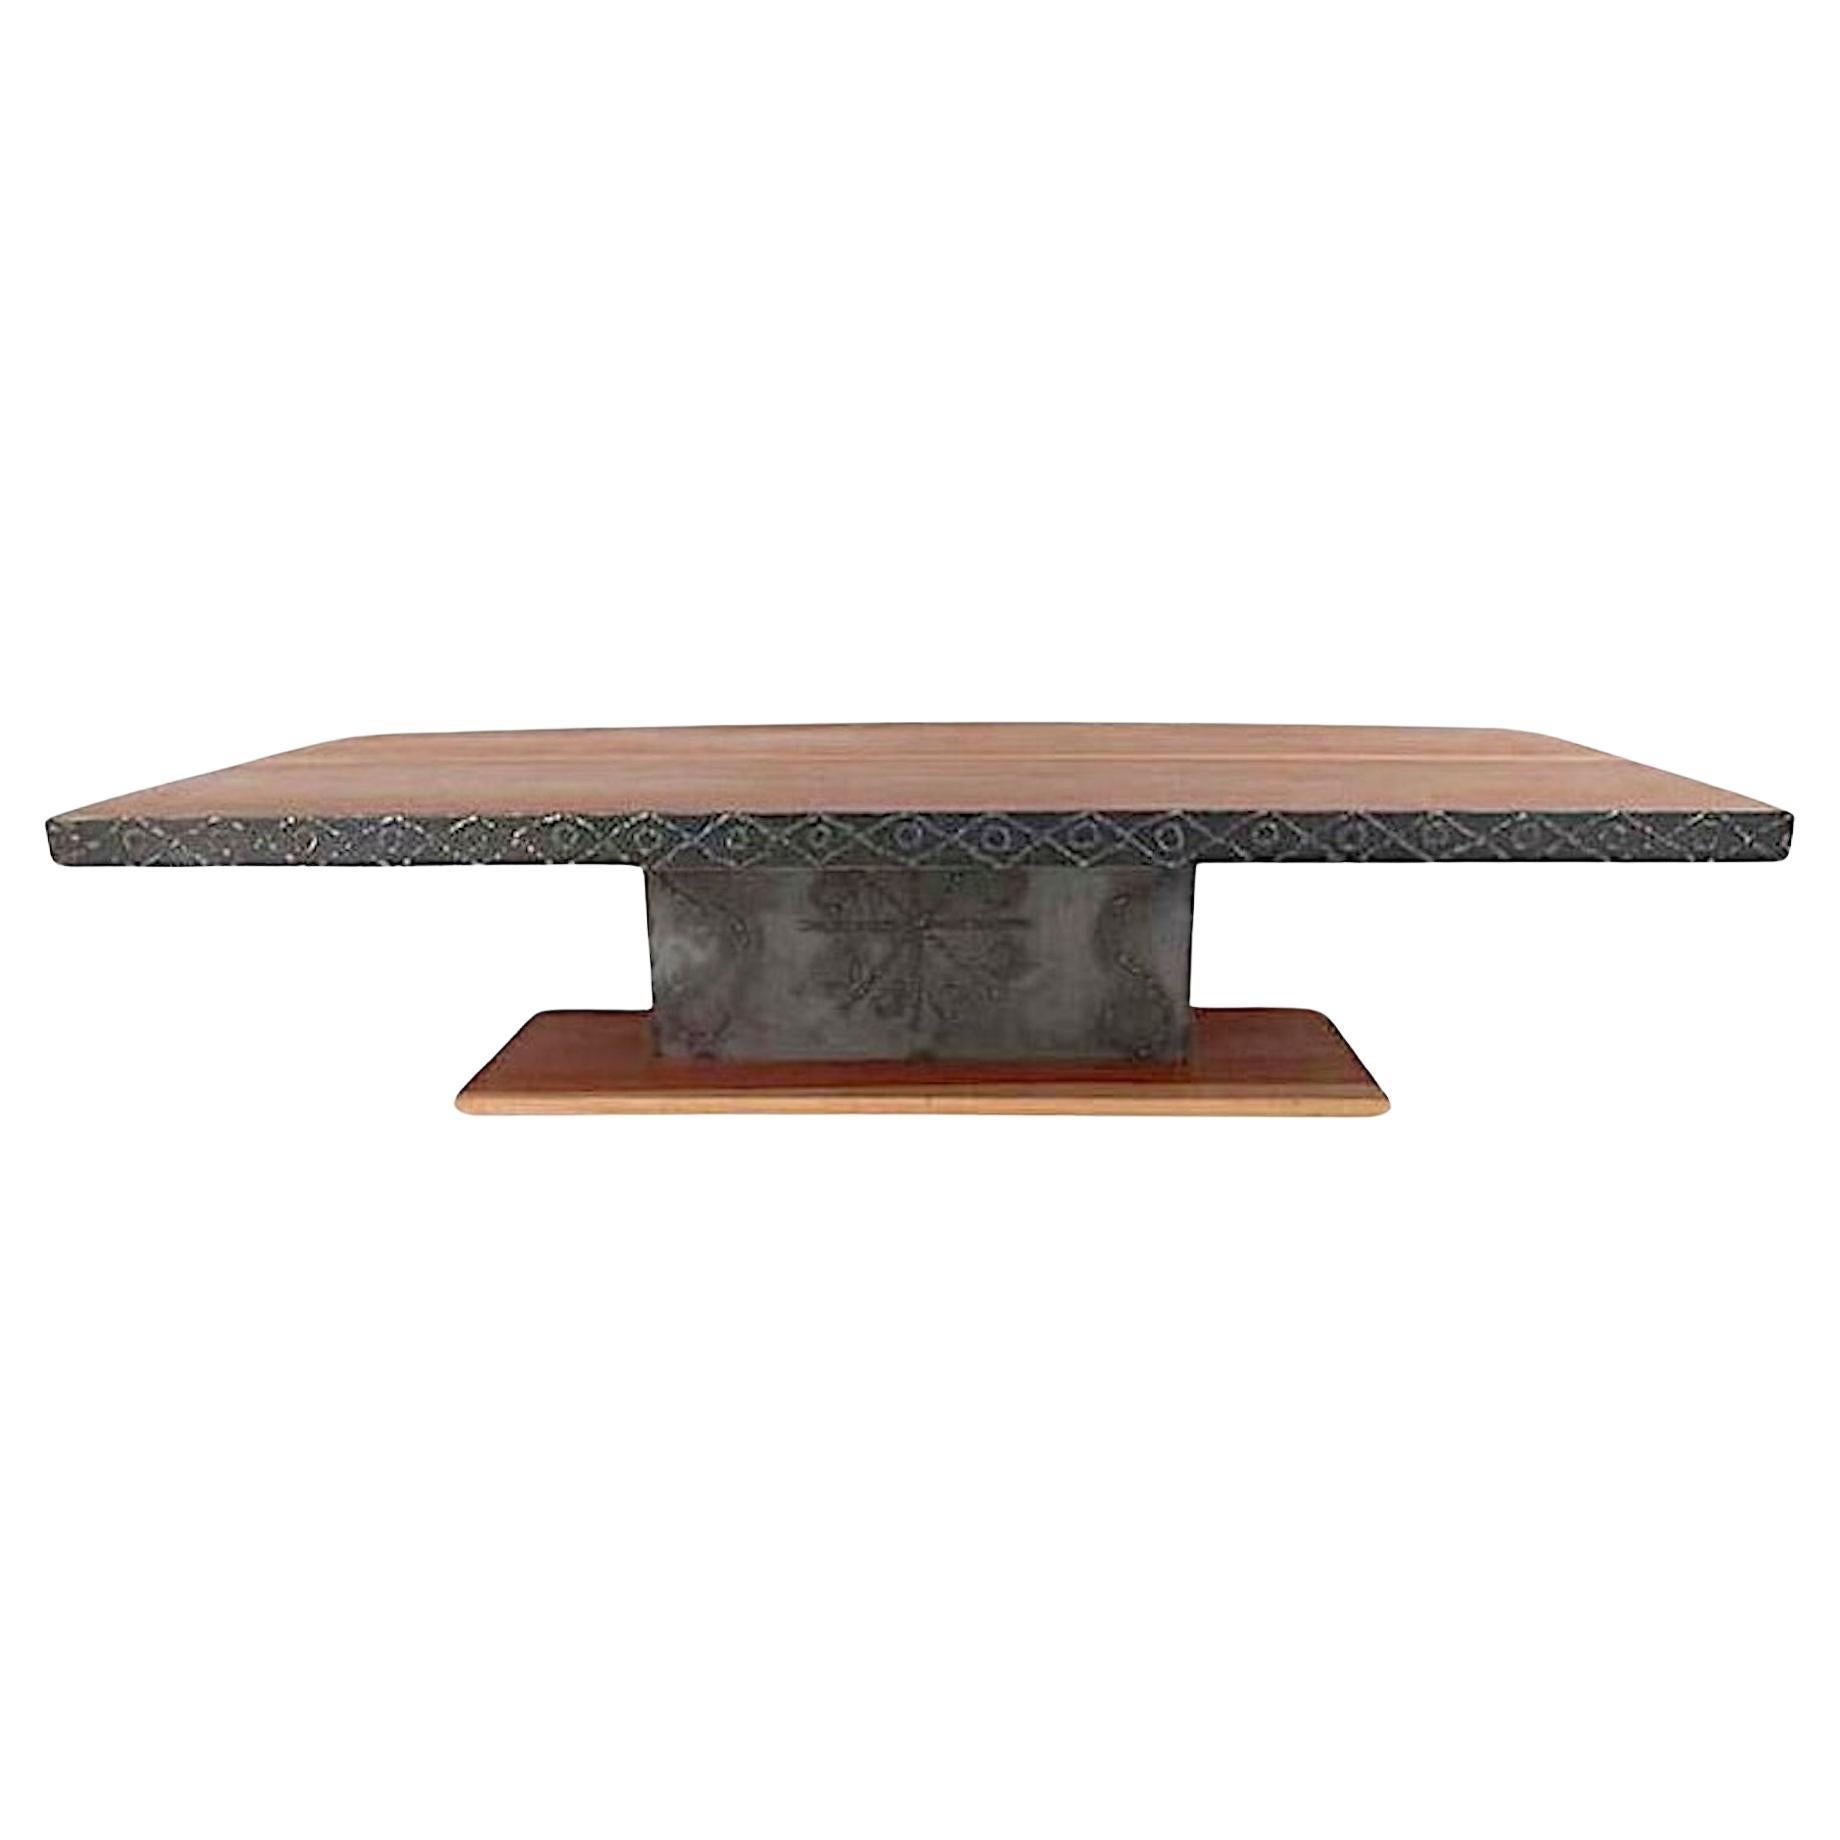 Artisinal Brutalist Coffee Table Signed by Garry Zayon